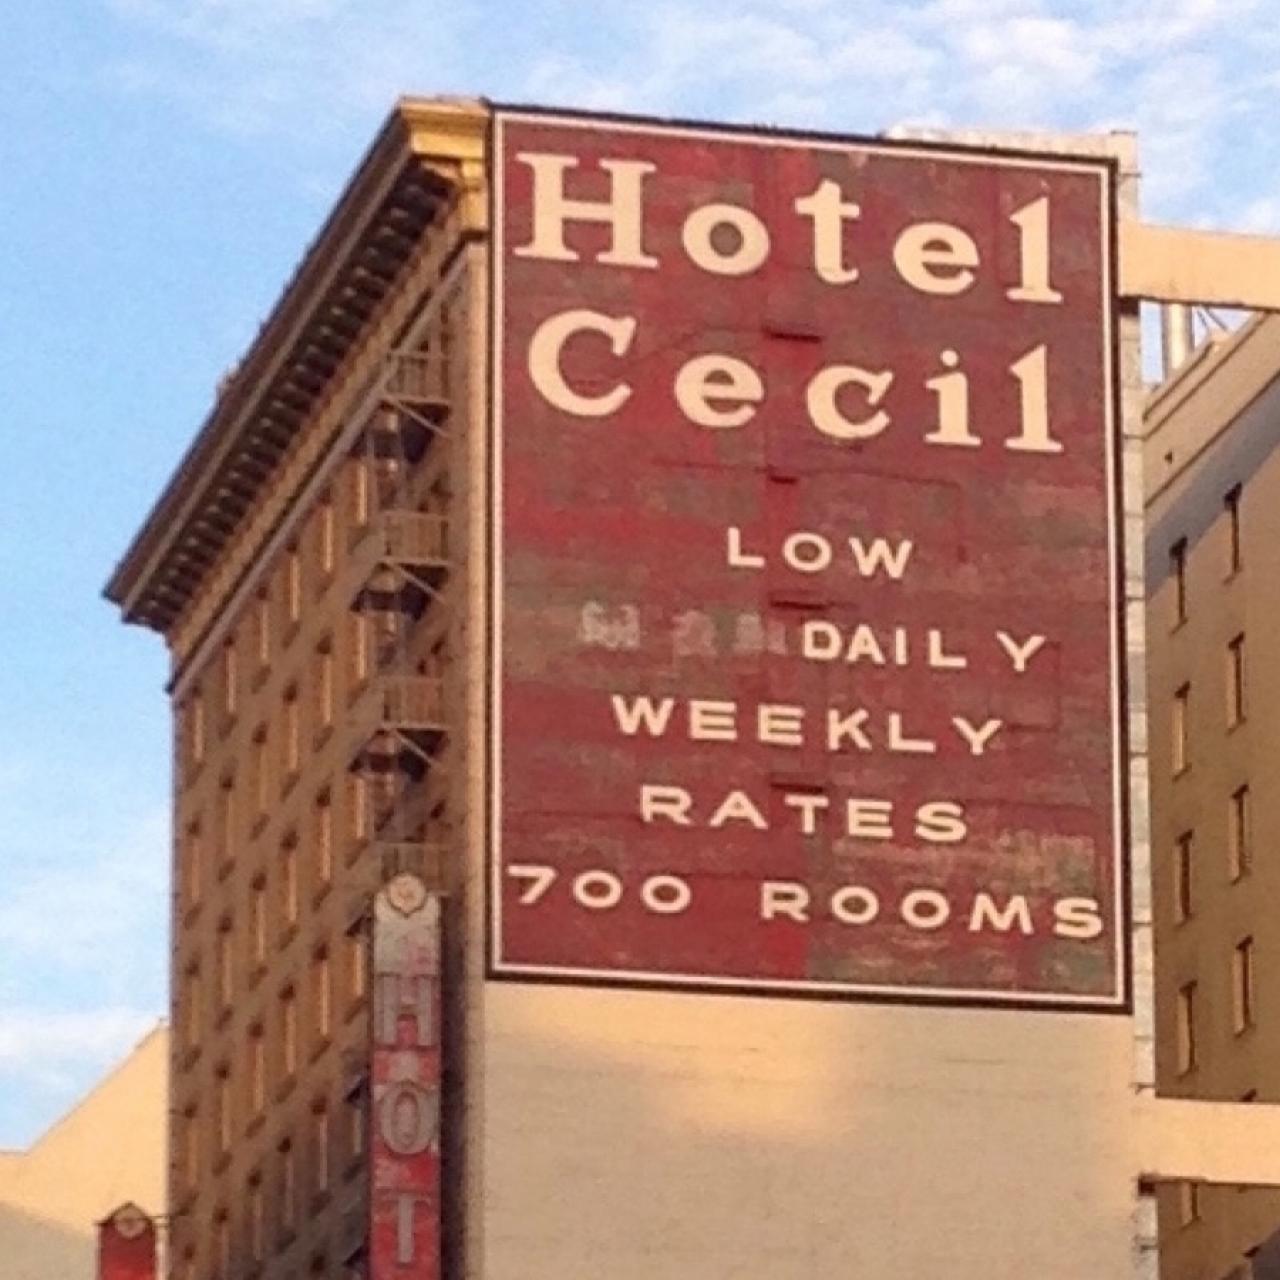 The Cecil Hotel Is Known as LA's Most Haunted for Many Horrifying